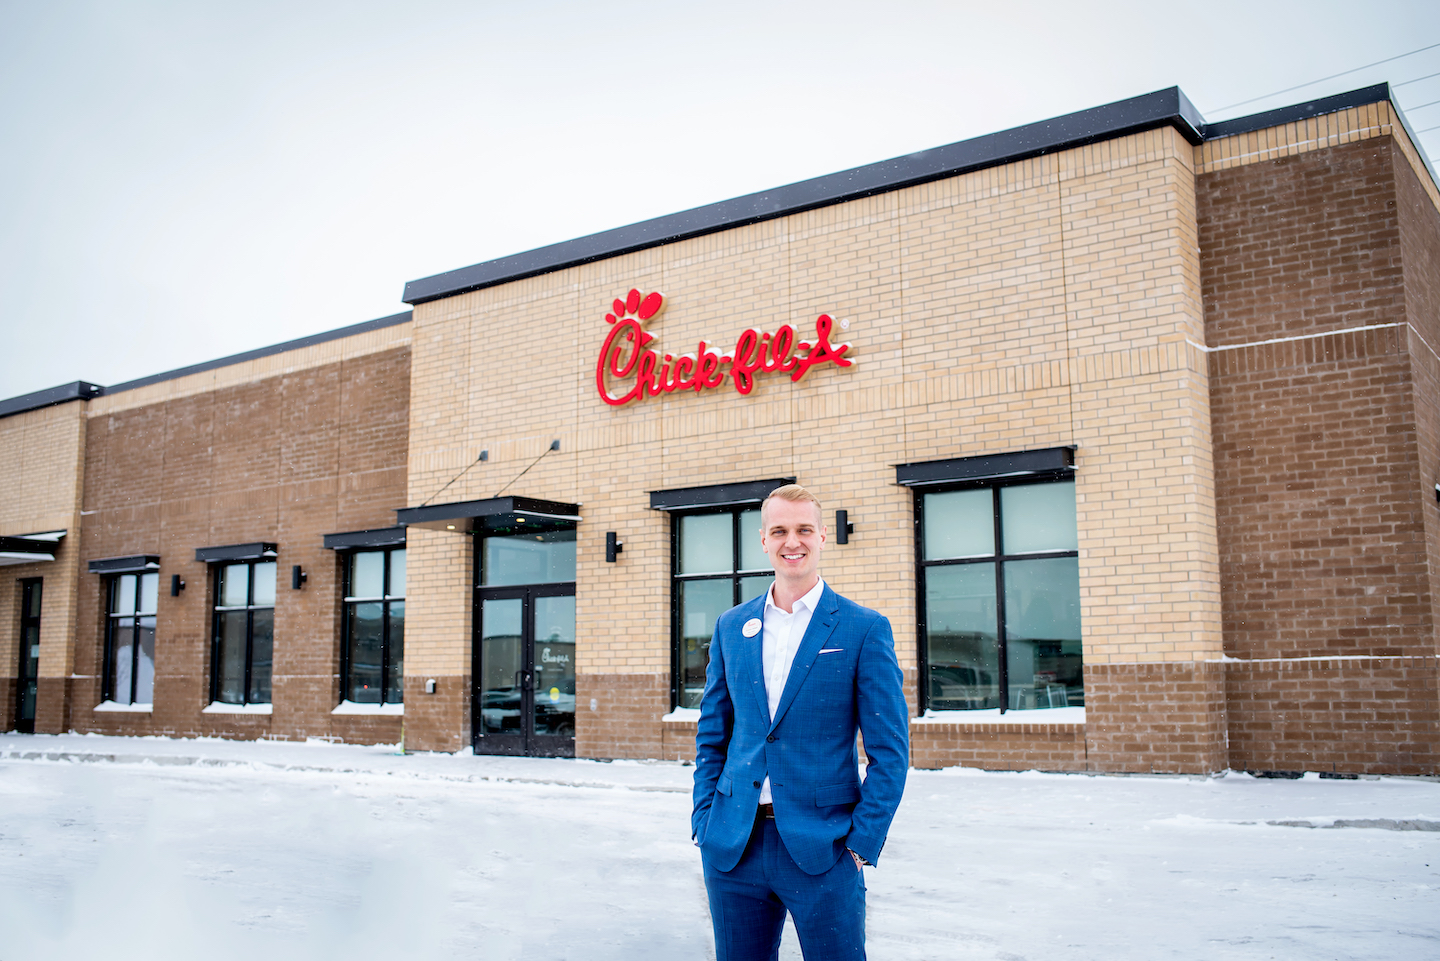 New Owner/Operator of Chick-fil-A North Barrie, Lincoln Nikkel, stands outside the restaurant smiling